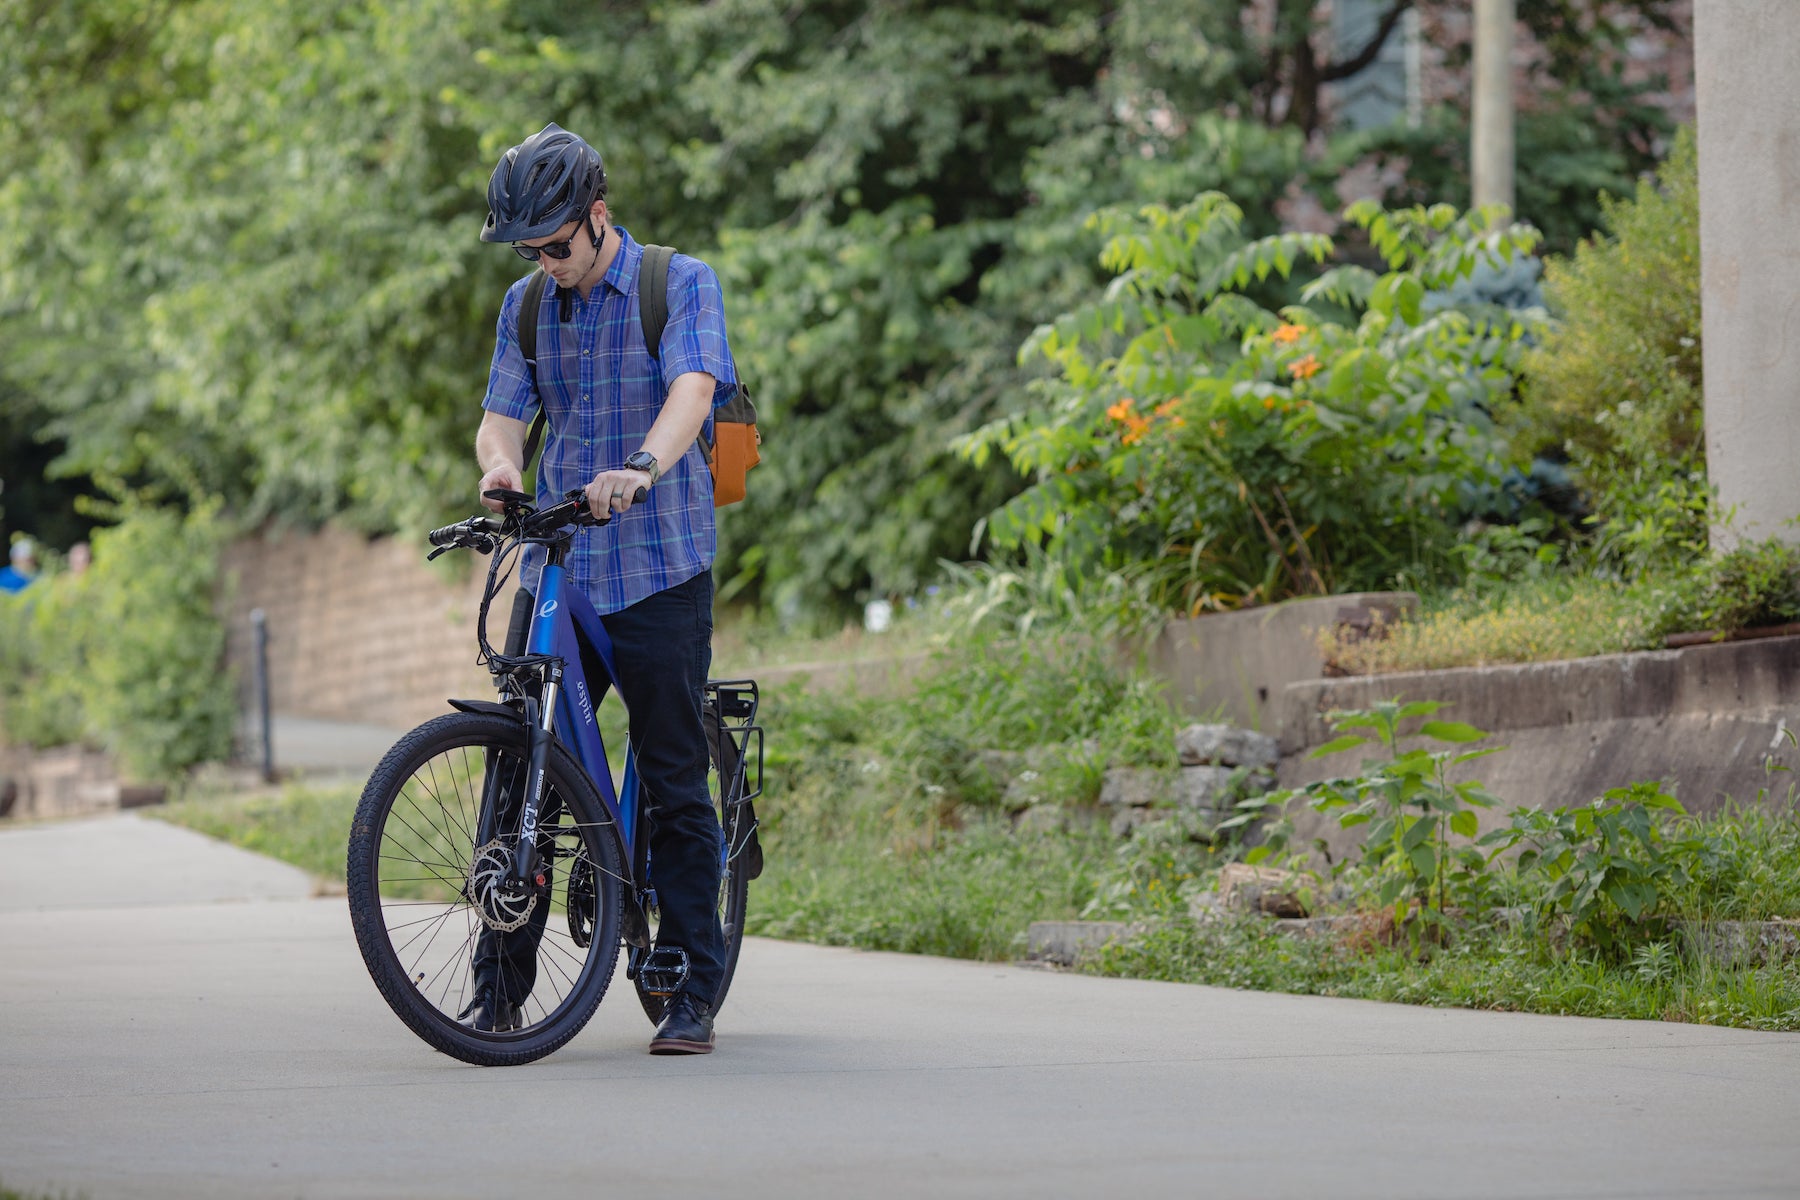 Things to Consider in Choosing an Electric Bike For Commuting